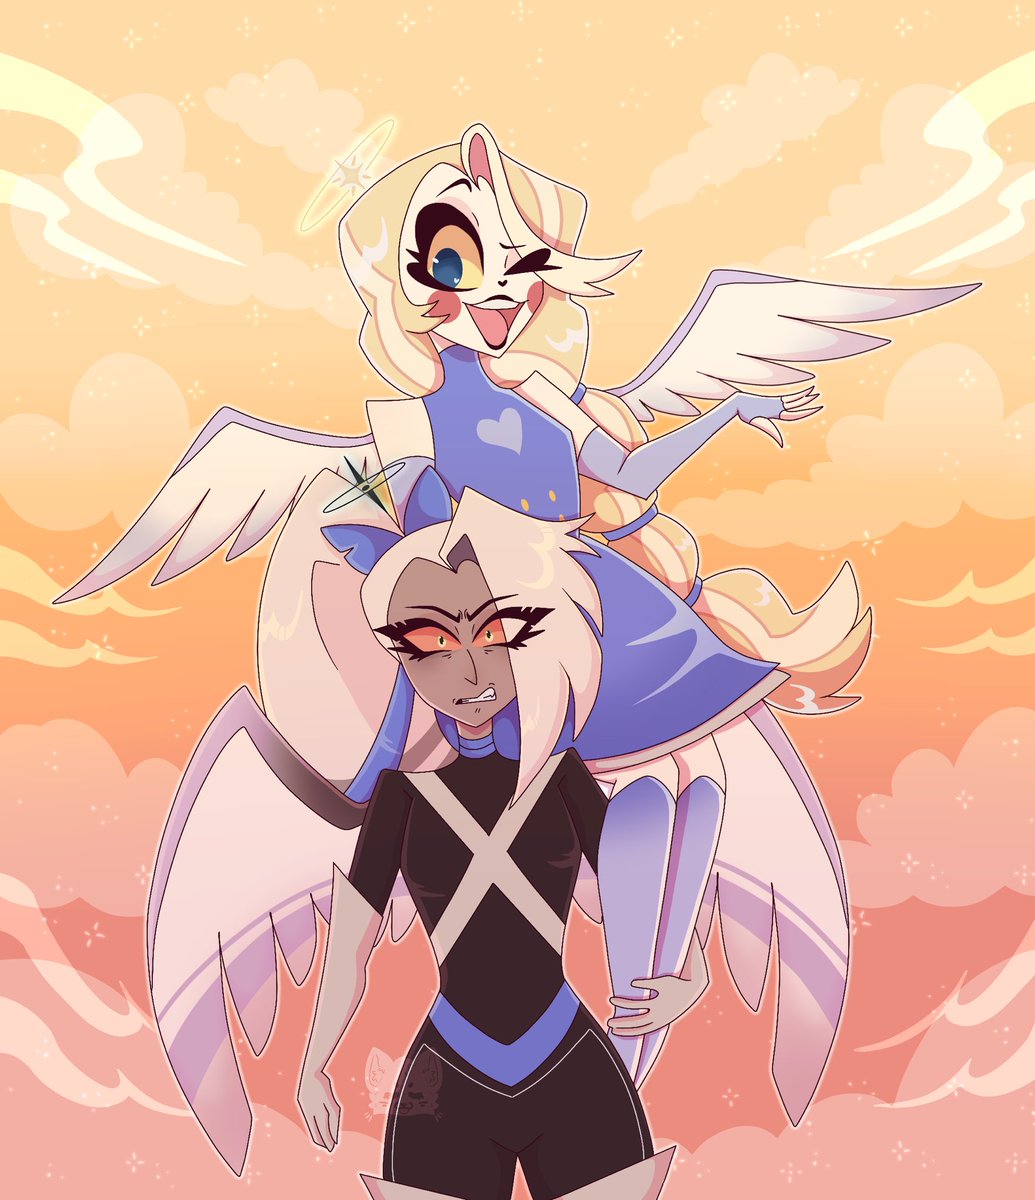 “Sorry , sweetie but there’s no defying their fates “ - - The swap au created by @soggywhiskers is so GOOD had to draw some fan art of the girls 💙💙 #chaggie #chaggiefanart #HazbinHotel #HazbinHotelFanart #CharlieMorningstar #vaggie